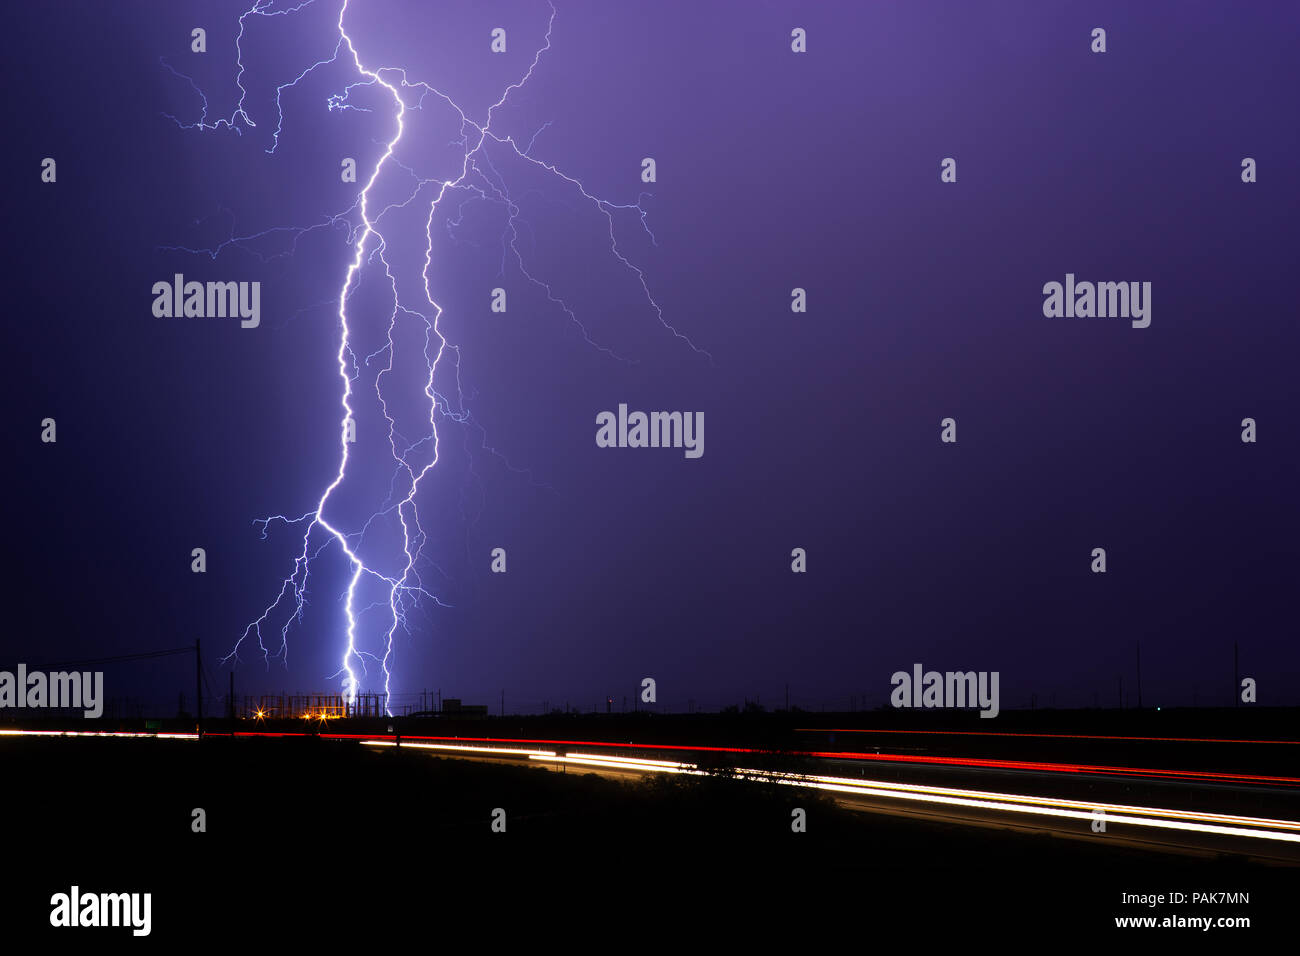 A pair of lightning bolts strike an electrical substation during a nighttime thunderstorm in Tucson, Arizona Stock Photo